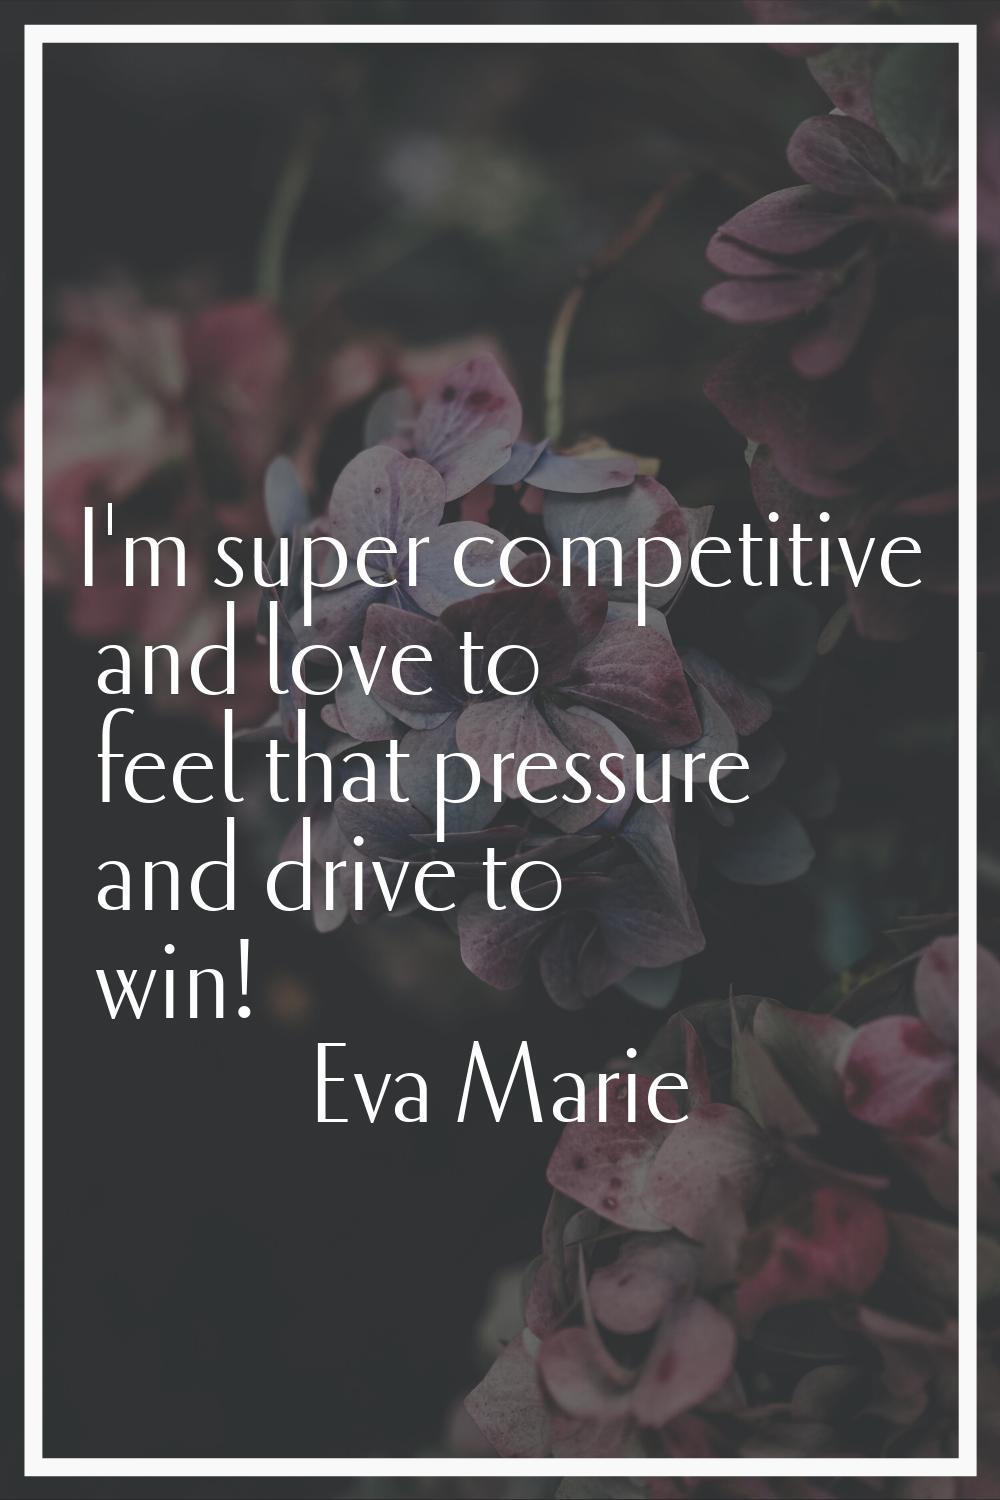 I'm super competitive and love to feel that pressure and drive to win!